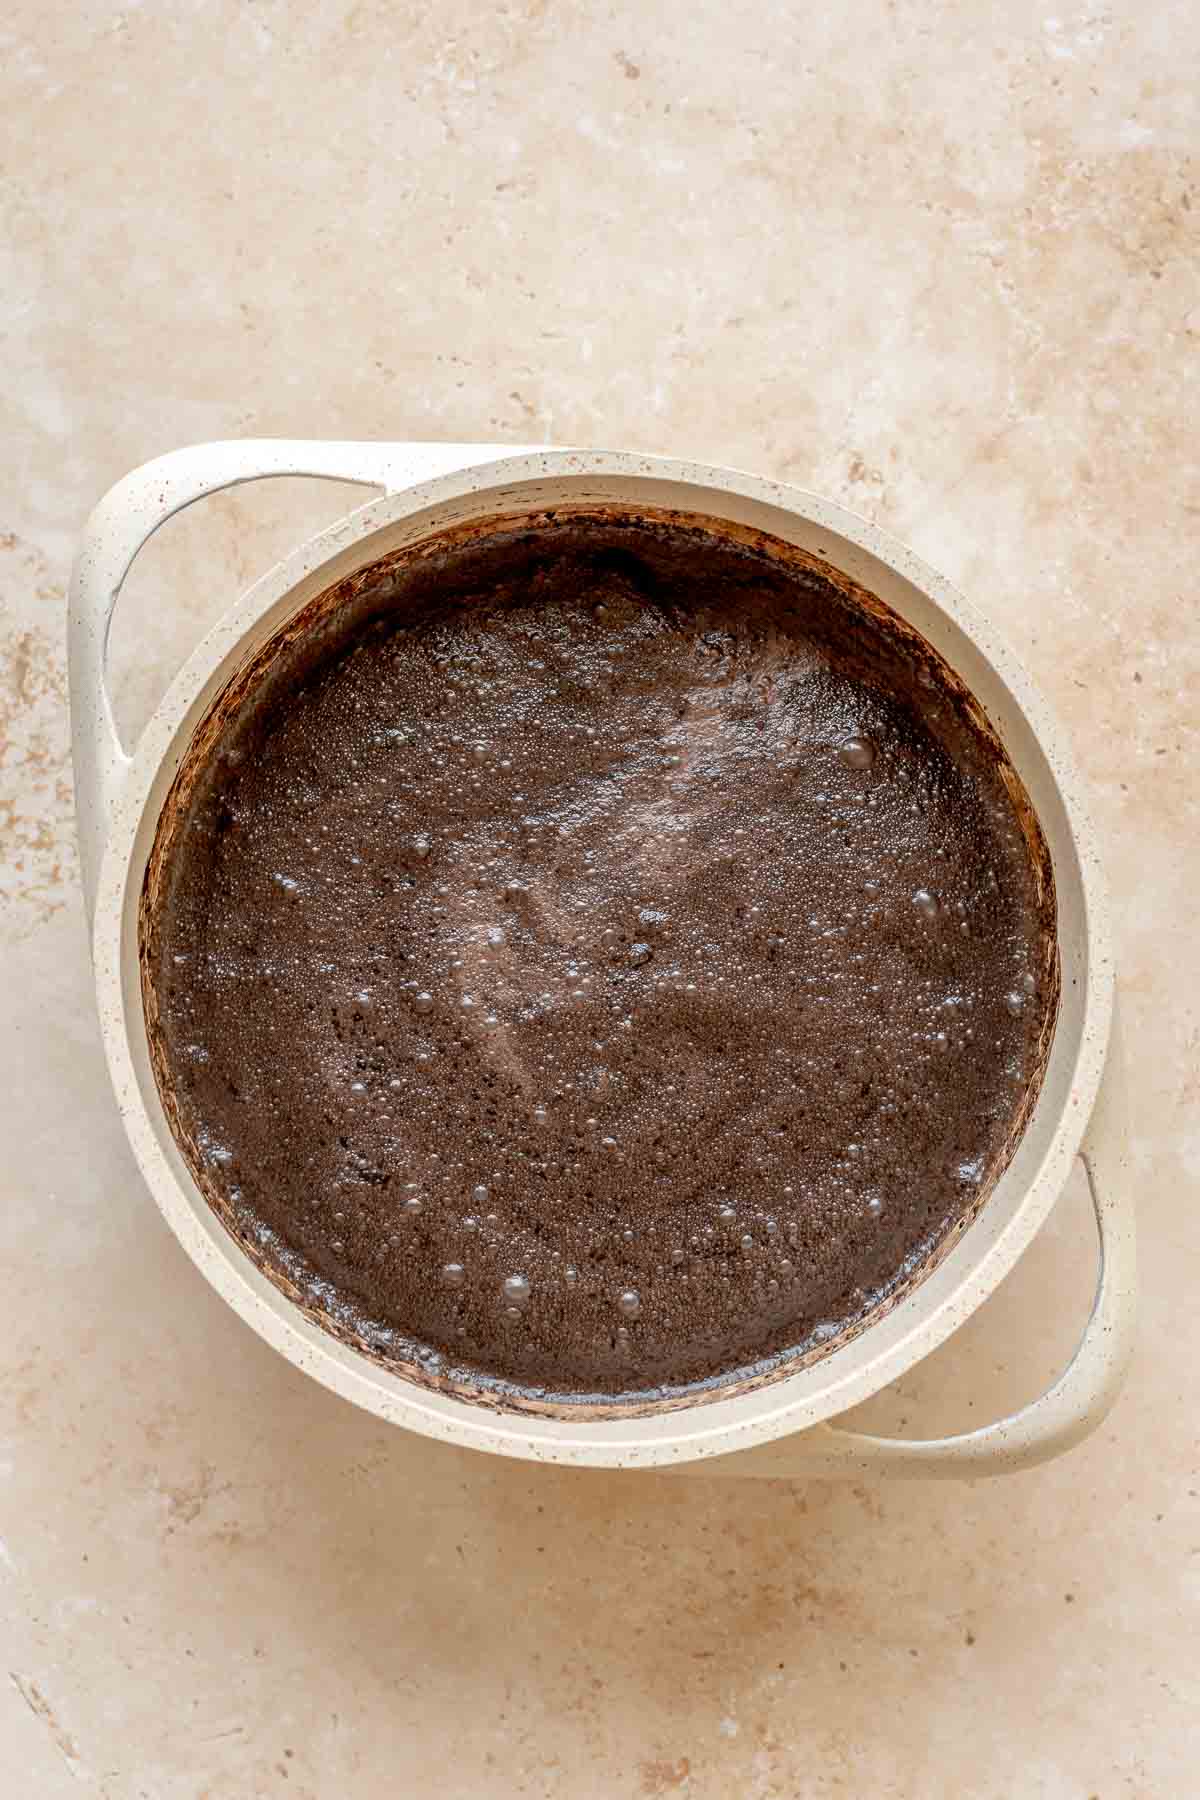 Cocoa powder and liquid mixed together in a saucepan.